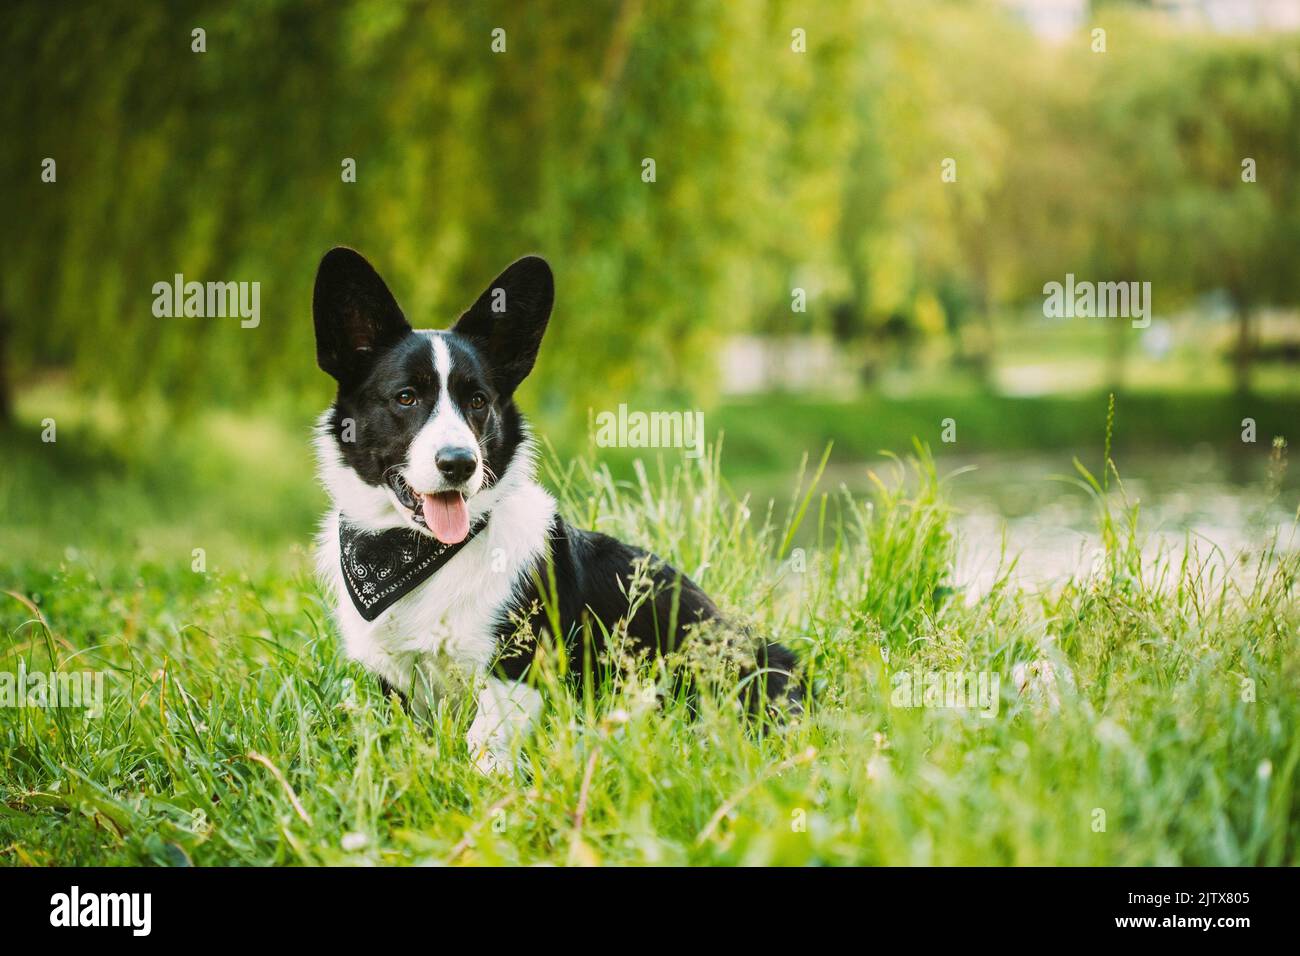 Funny Cardigan Welsh Corgi Dog Sitting In Green Summer Grass Near Lake Under Tree Branches In Park. Welsh Corgi Is A Small Type Of Herding Dog That Stock Photo